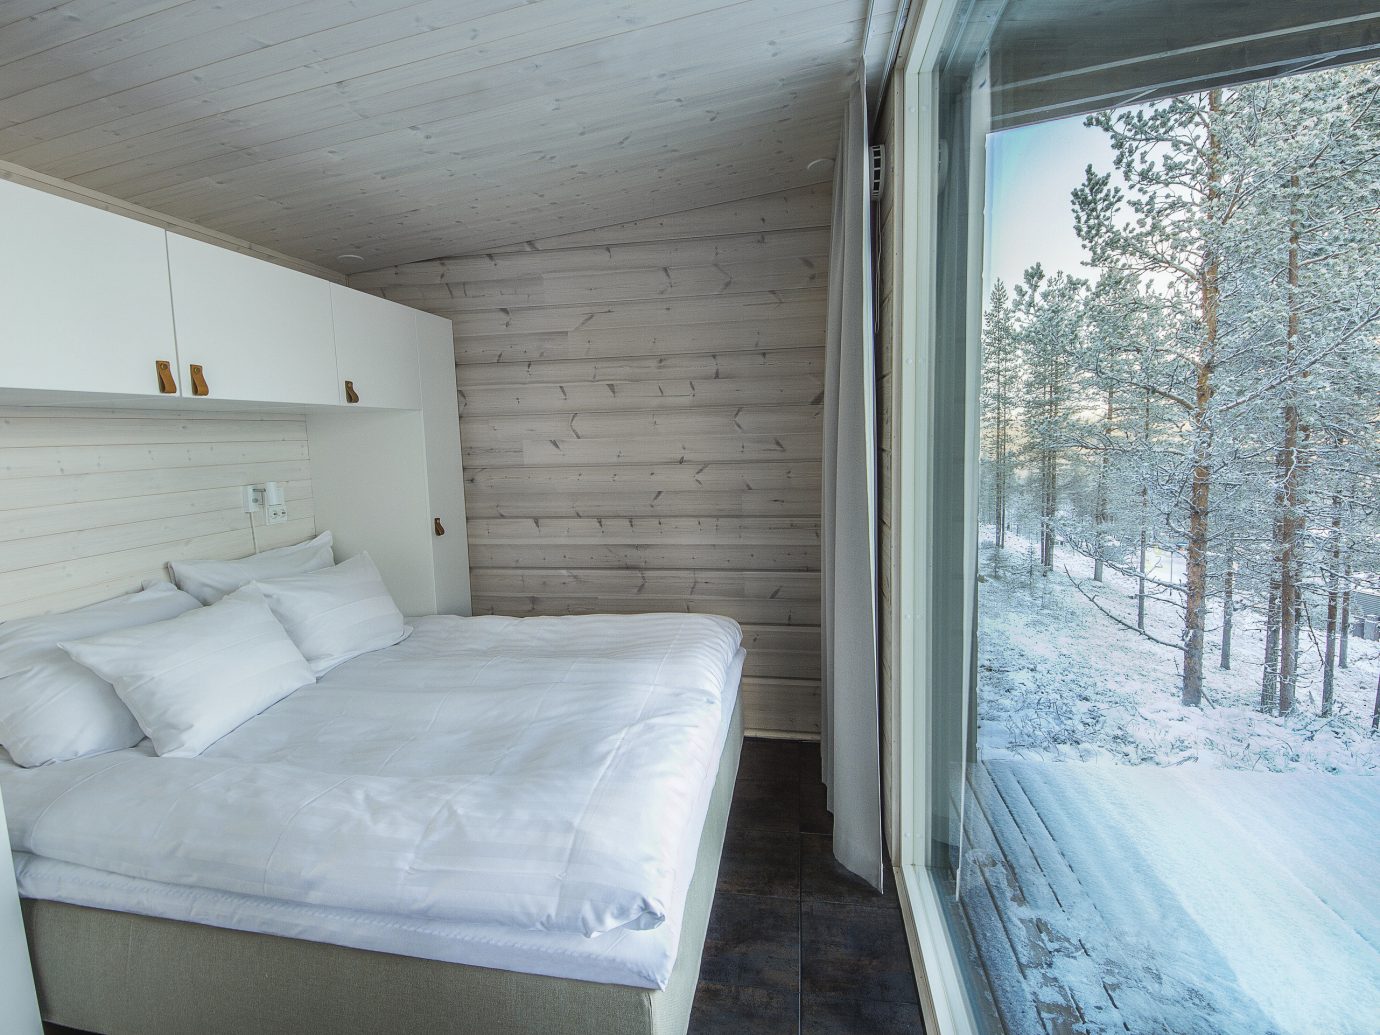 Finland Trip Ideas indoor bed wall room property window Architecture ceiling home house real estate Bedroom snow interior design wood bed frame daylighting floor Winter